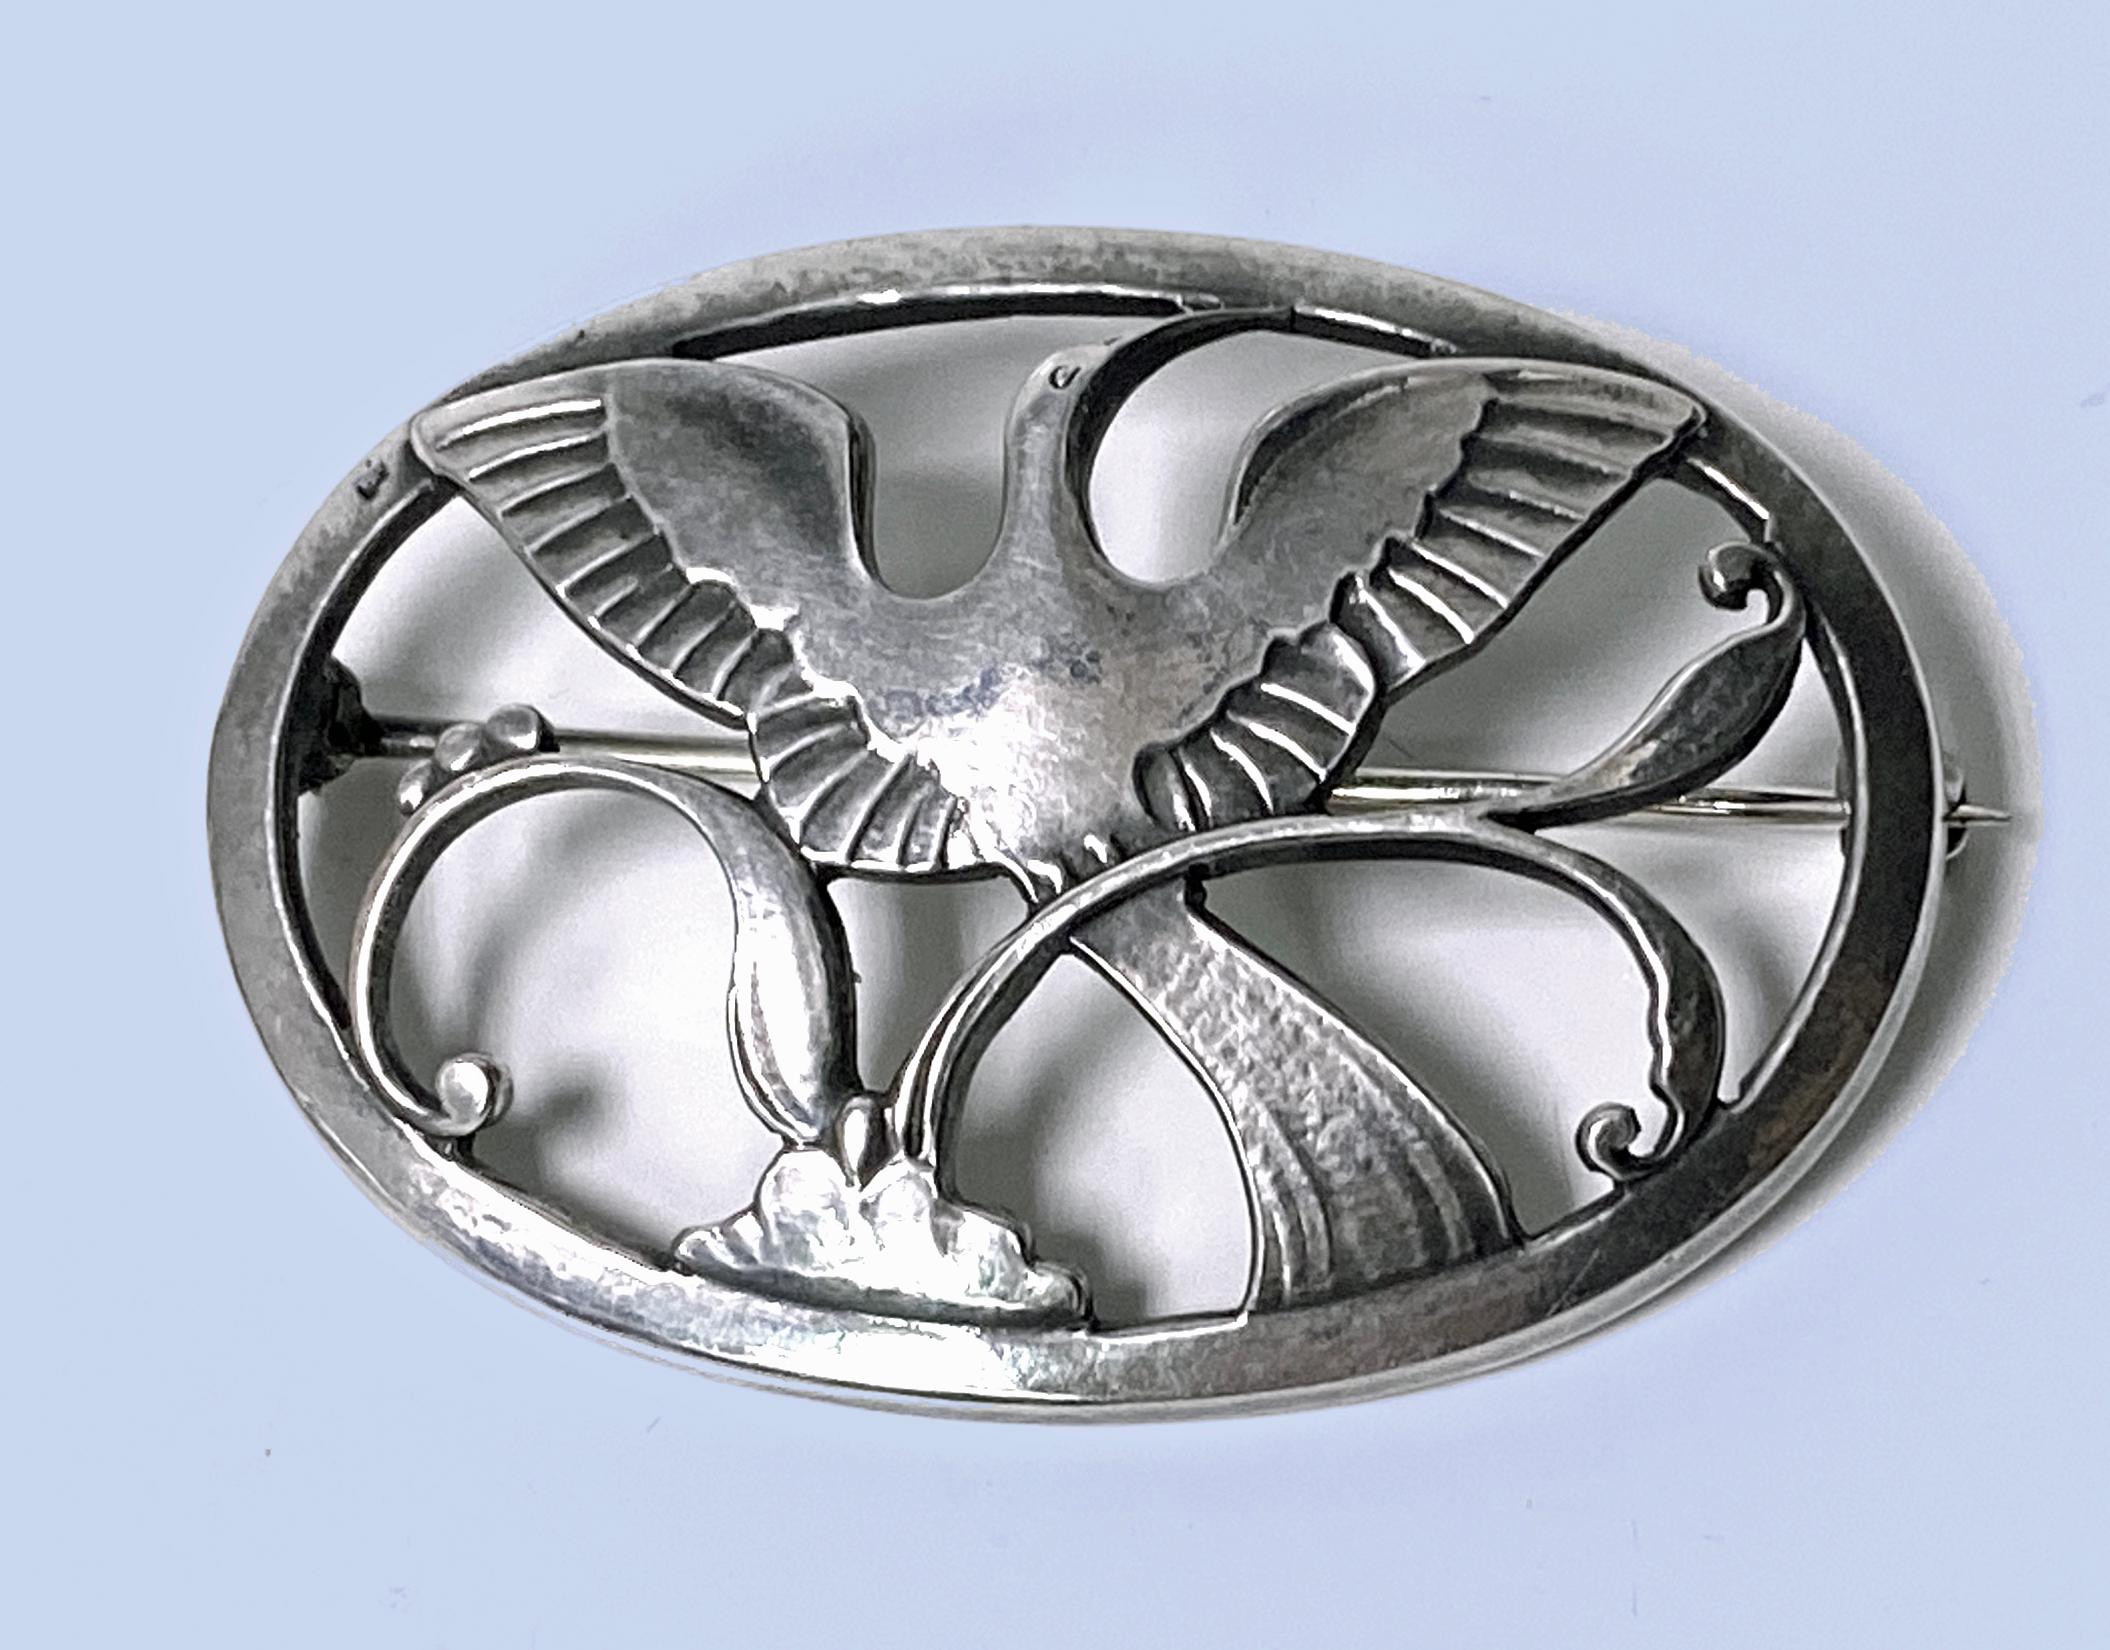 Georg Jensen Sterling Silver Bird of Paradise Brooch #238, designed by Arno Malinowski for Georg Jensen. Measures: 1.75 inches Weight 10.33 grams. Full Georg Jensen marks to reverse and design number 238